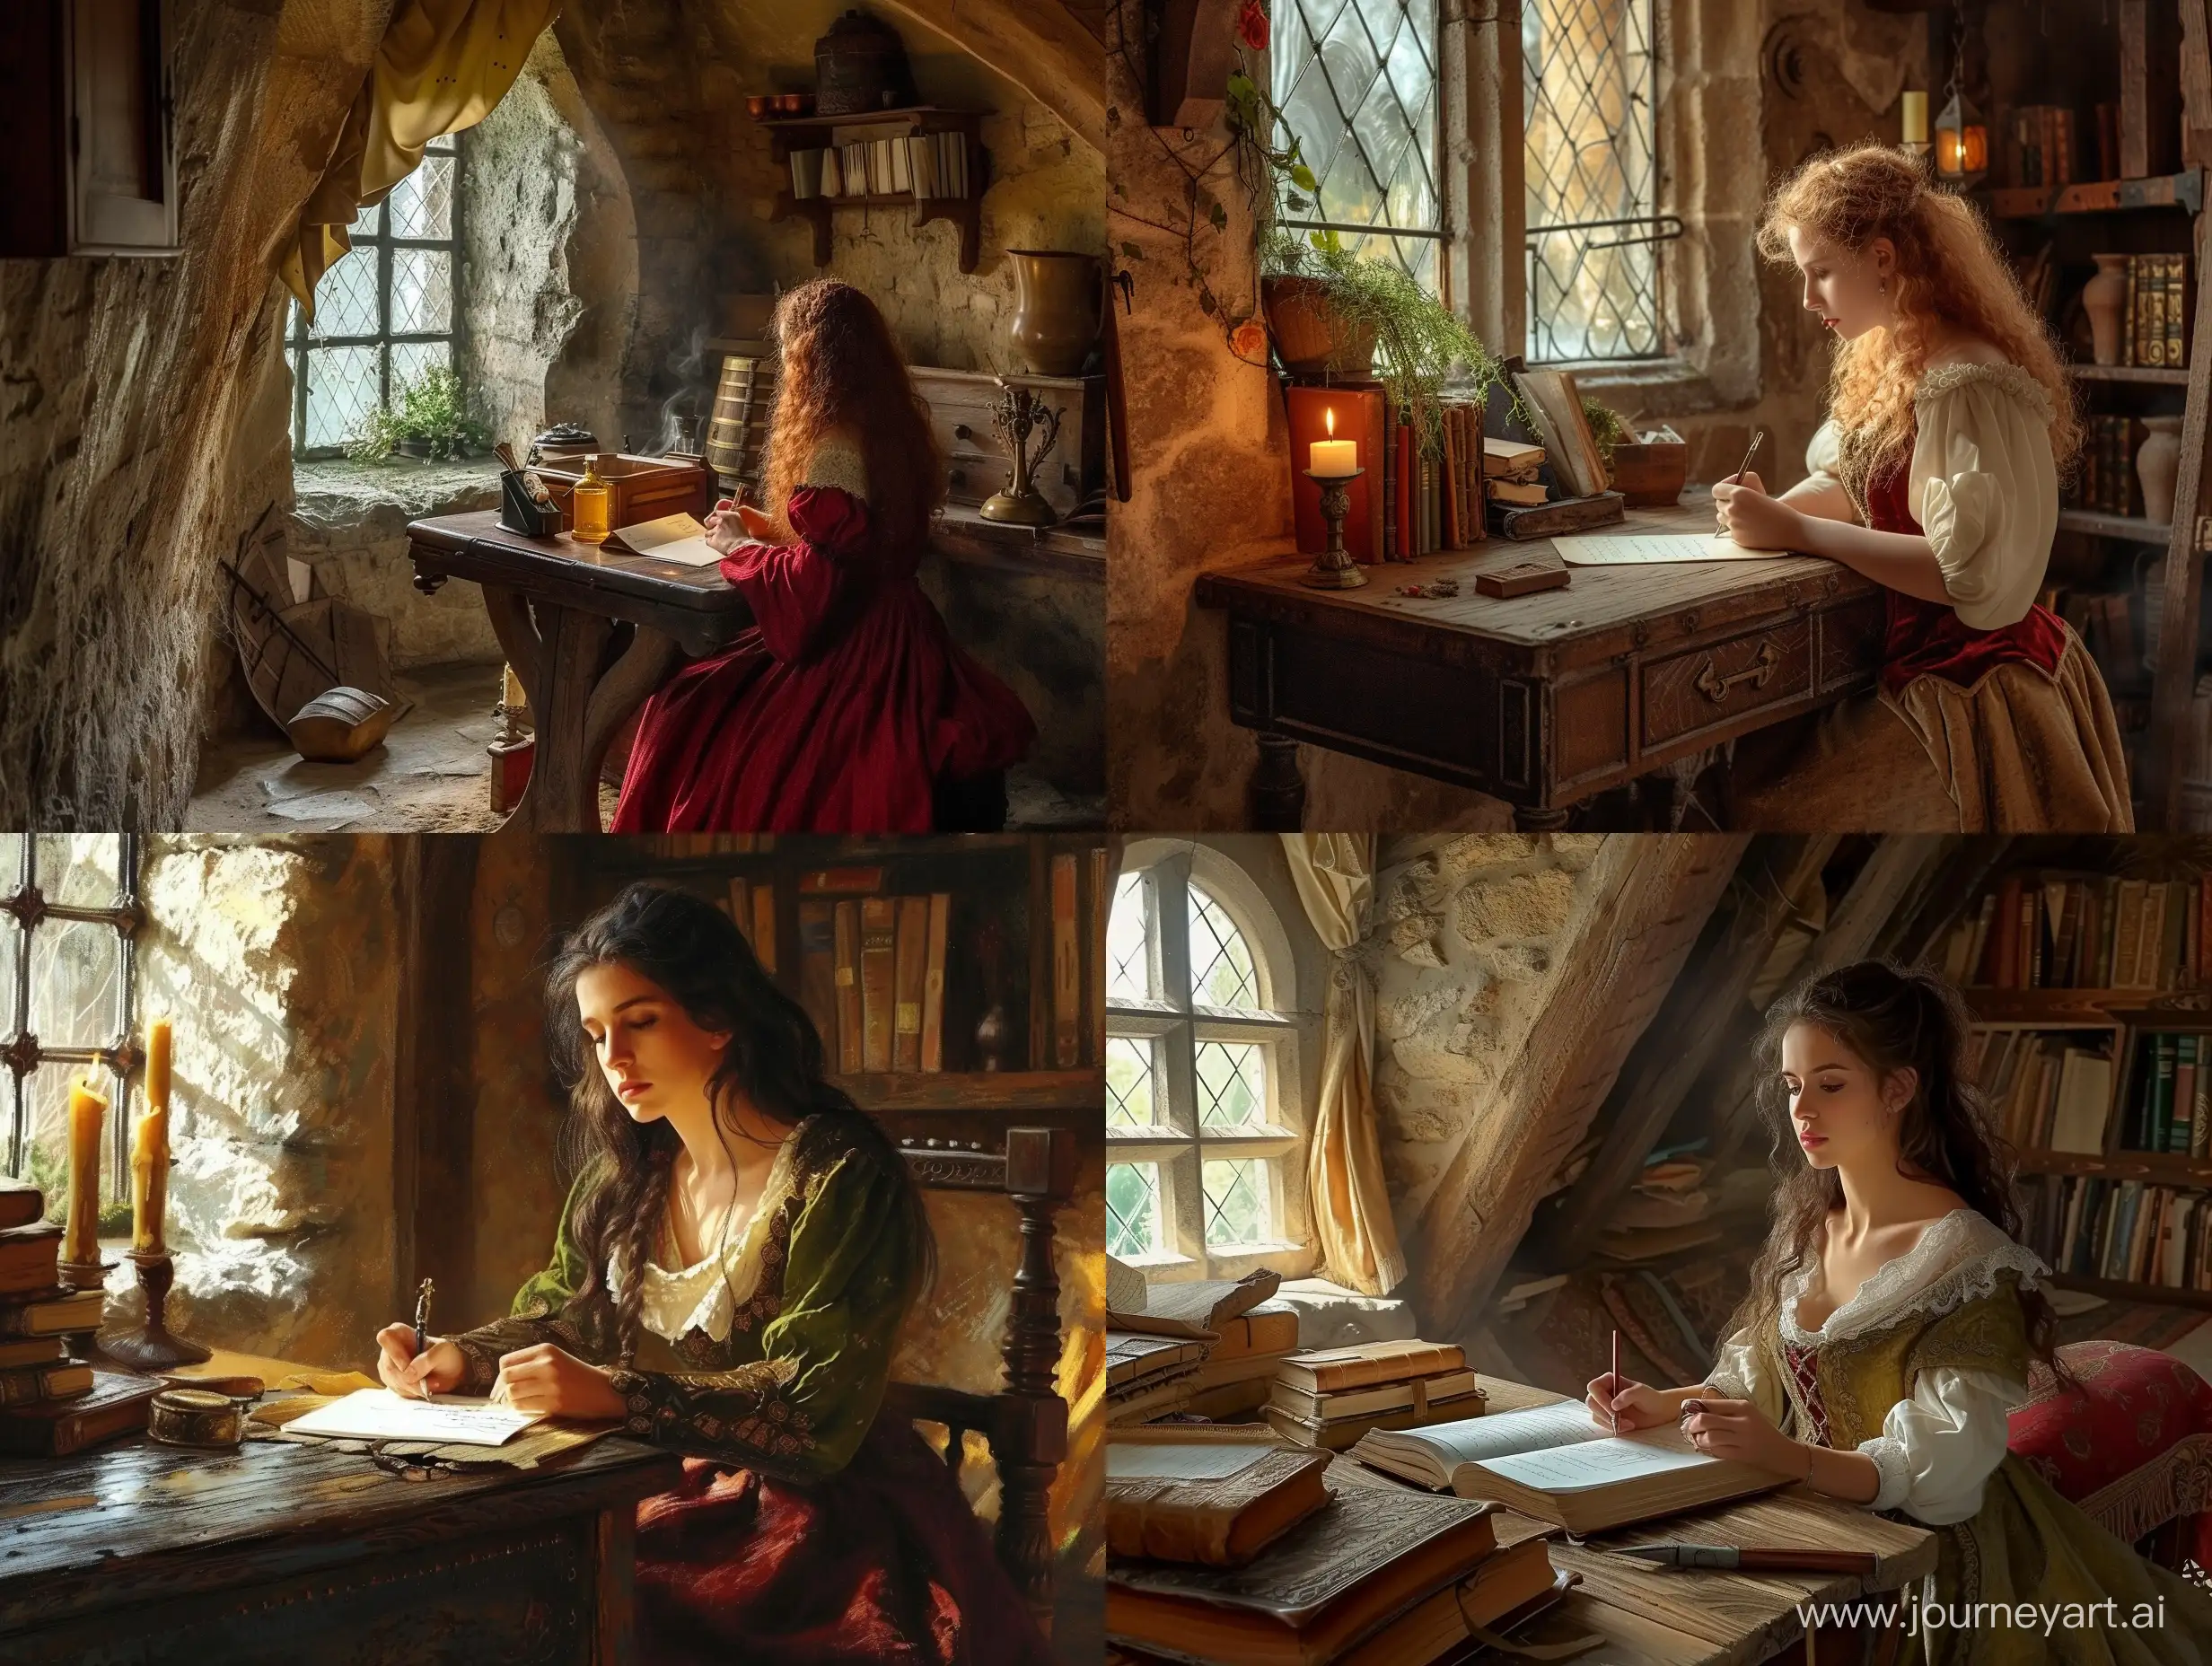 Triss-Merigold-Writing-a-Letter-in-a-Cozy-Medieval-Room